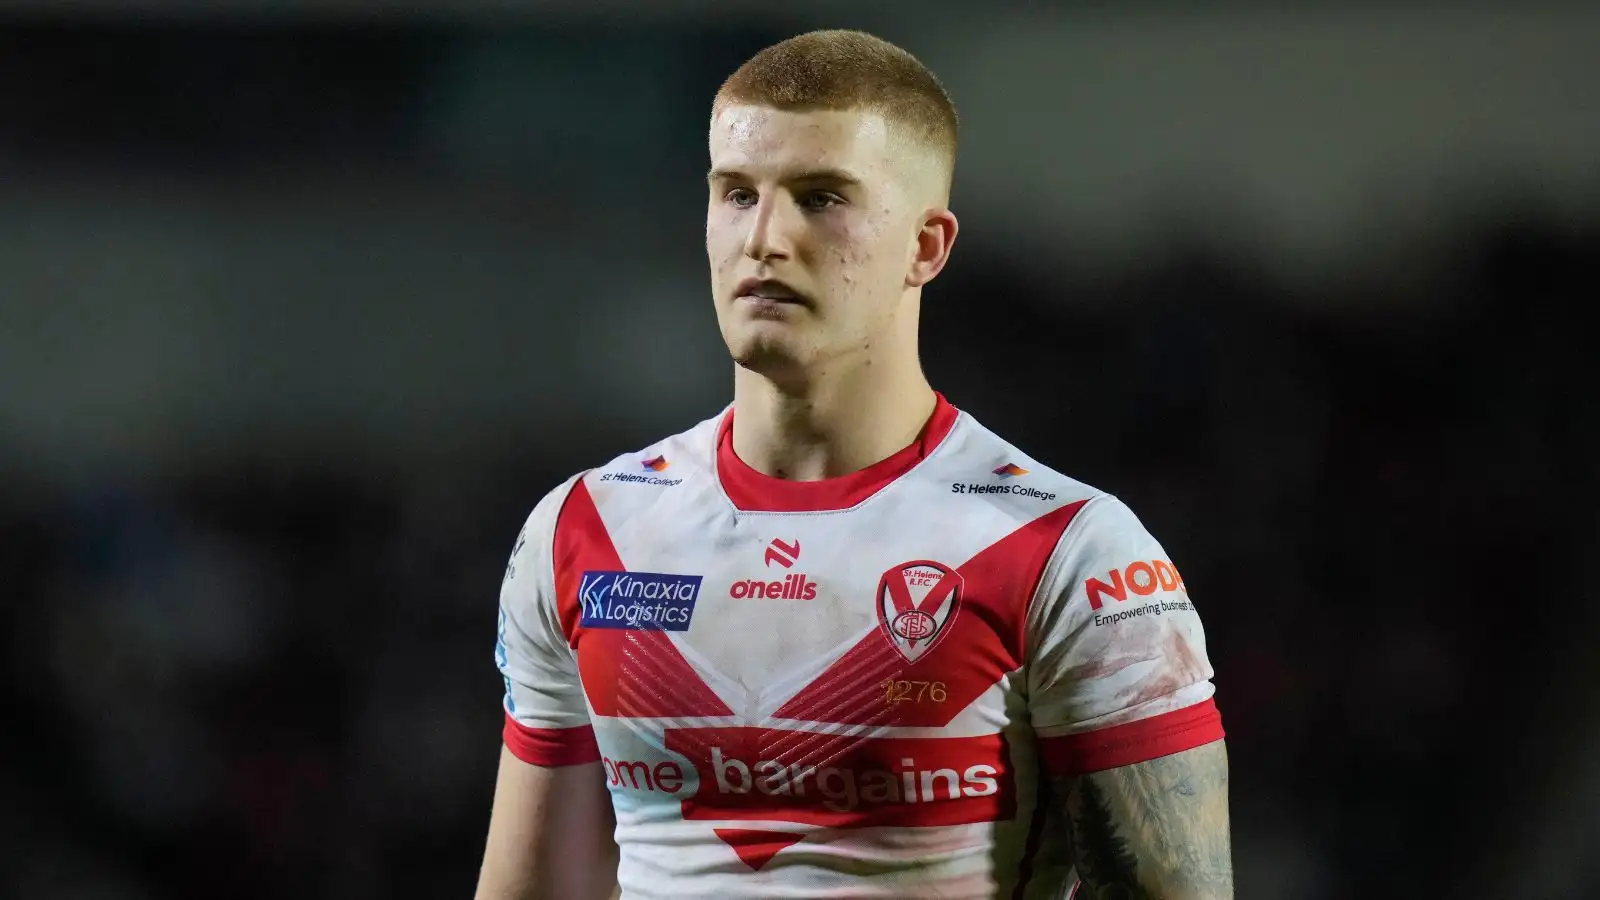 St Helens considering lodging complaint over South Sydney approach for George Delaney